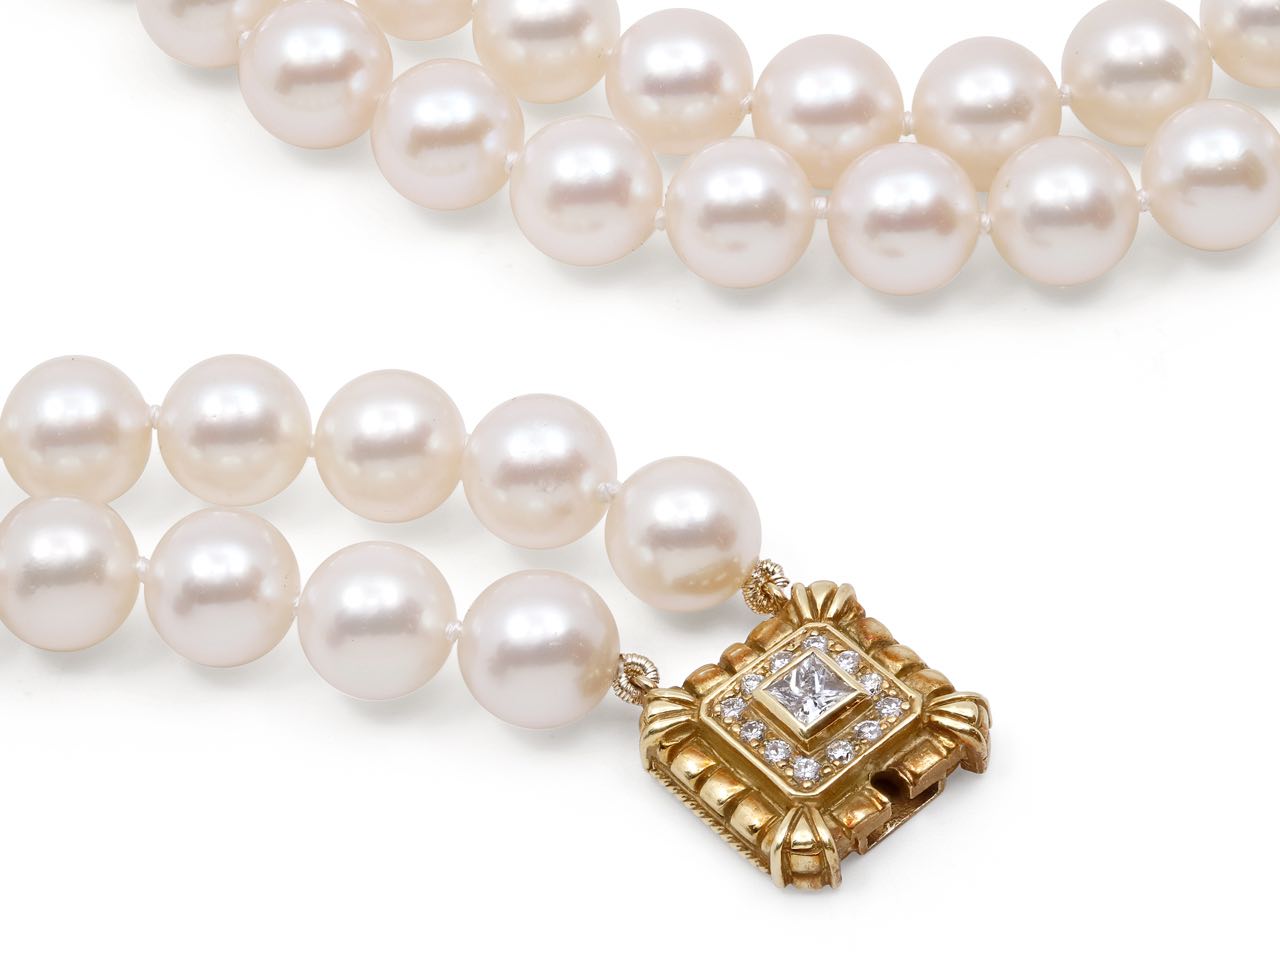 Double Strand Pearl Necklace with Diamond Clasp in 18K Gold